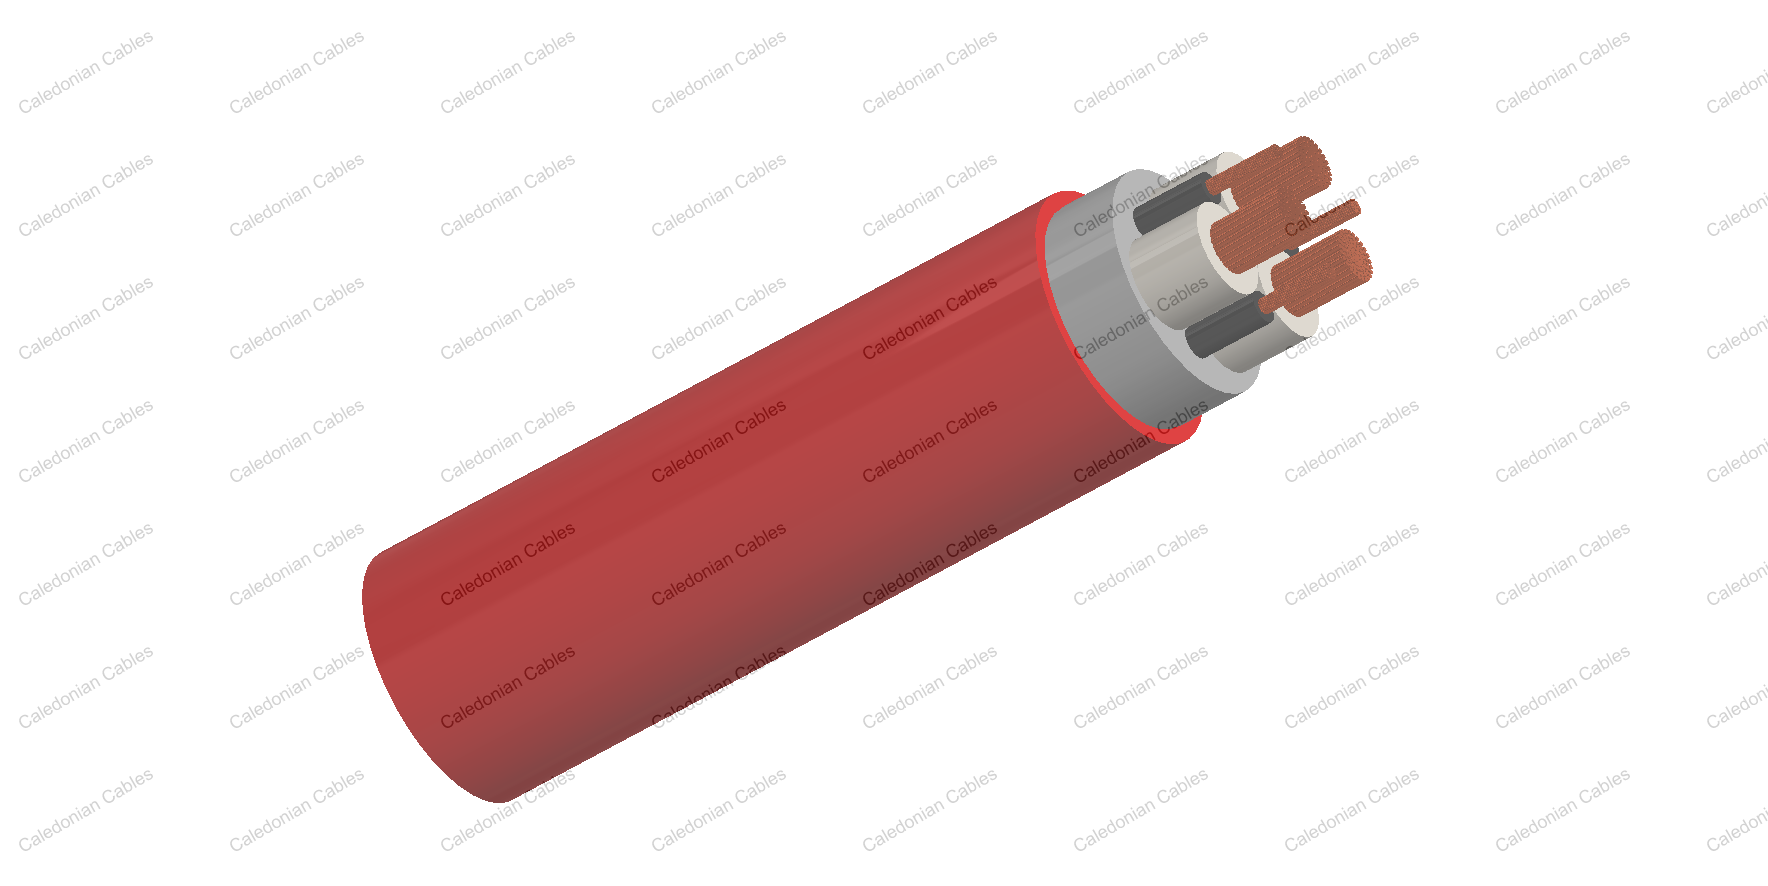 NTSCGEWOEU Medium Voltage Flexible Cable For Use In Water